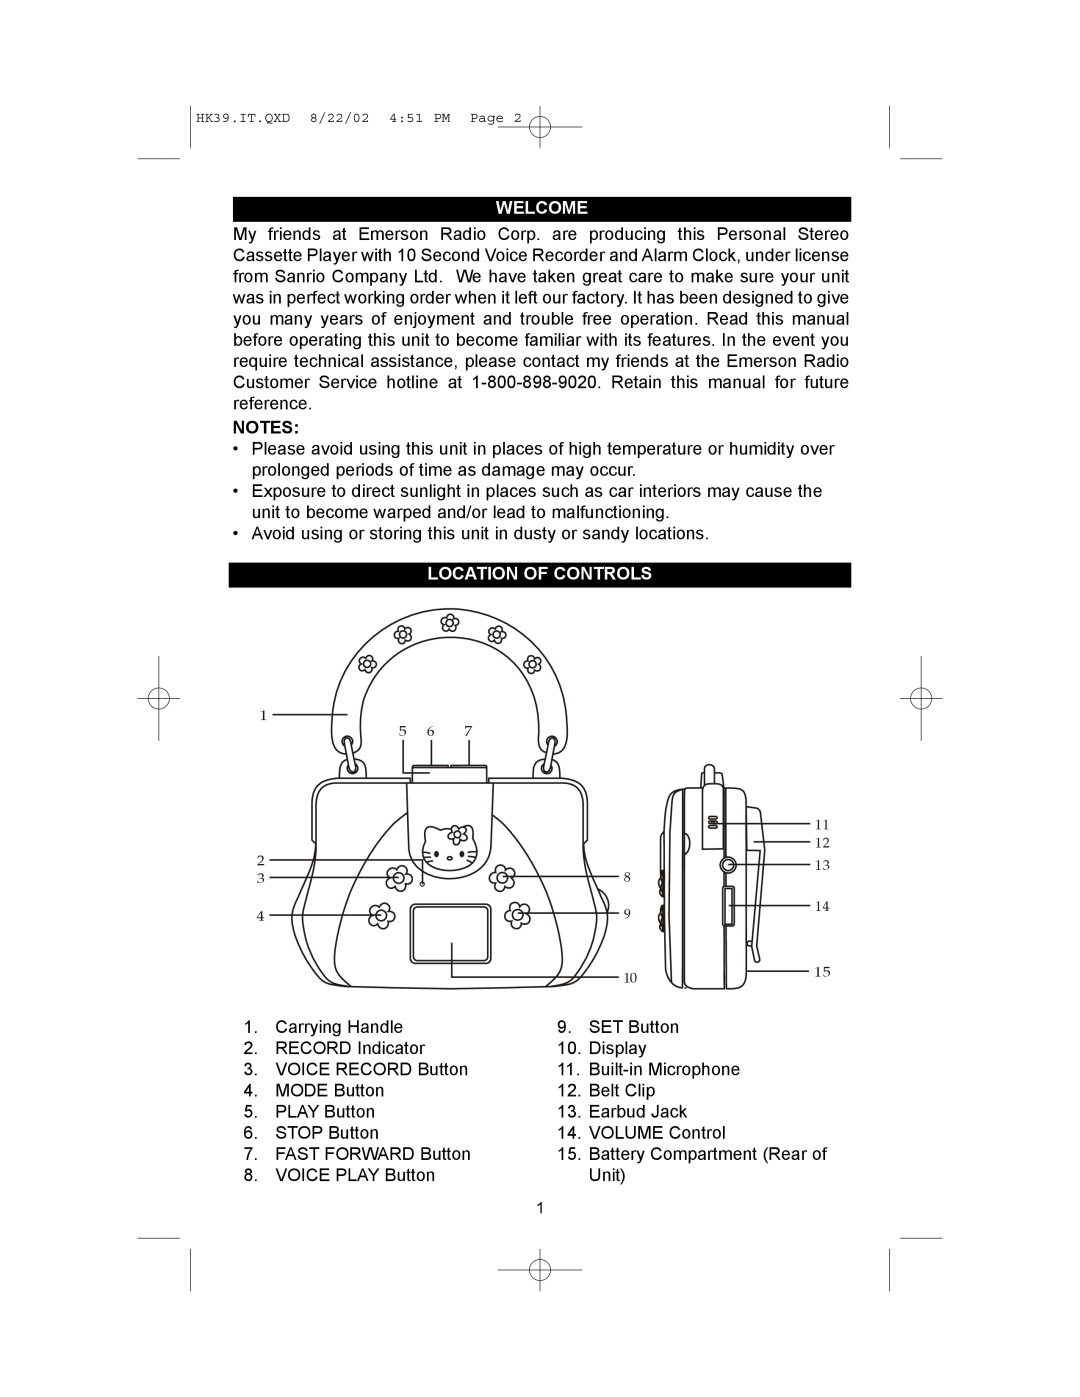 Emerson HK39 owner manual Welcome, Location Of Controls 